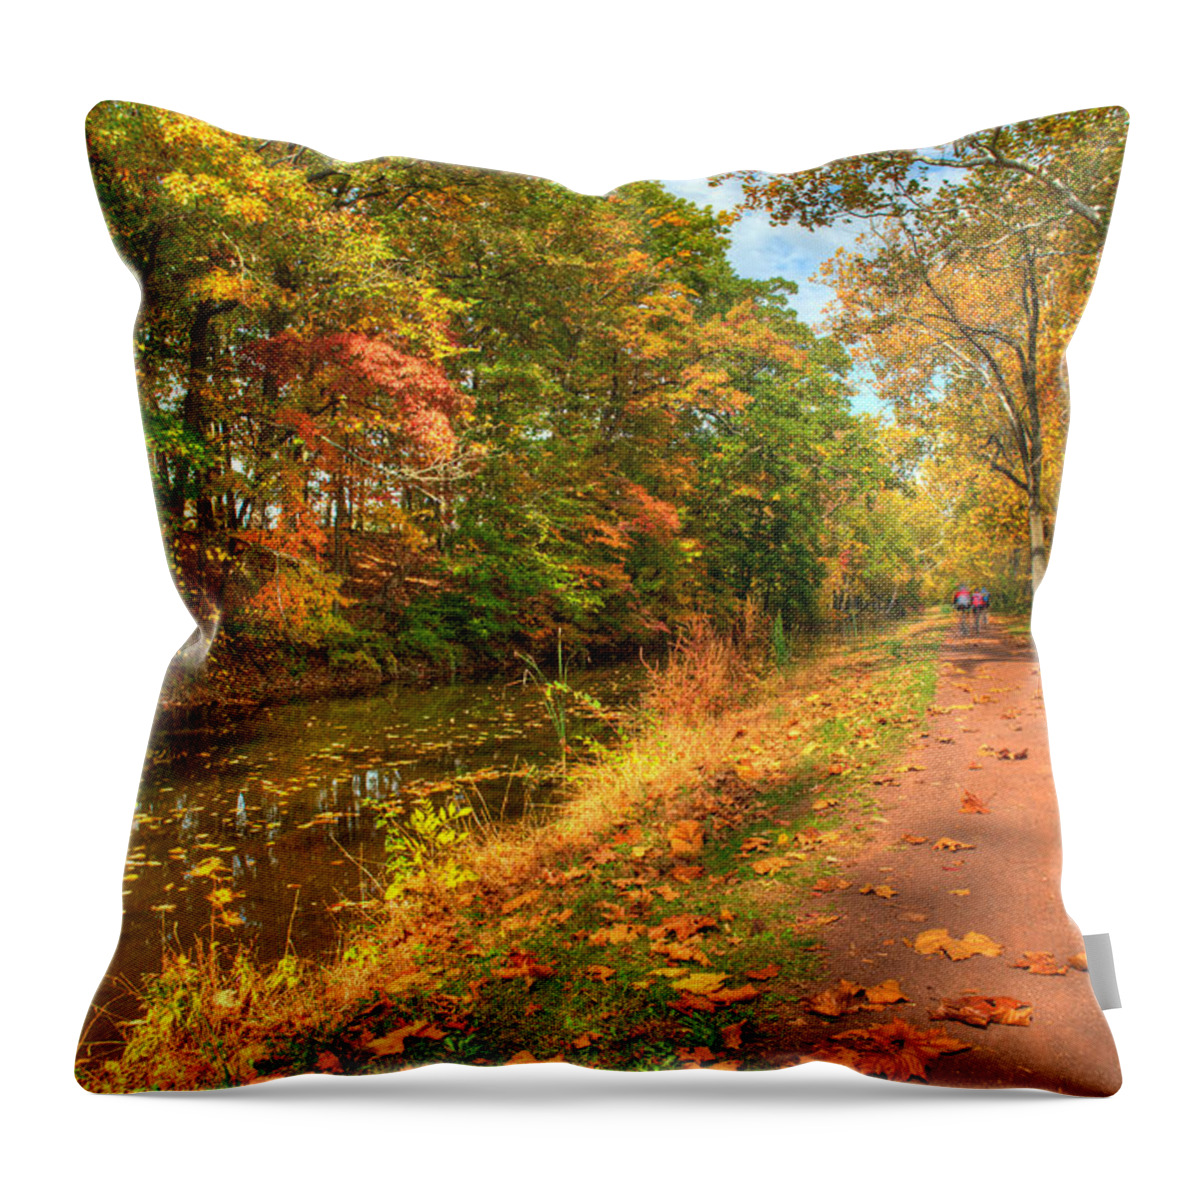 Washington Crossing Throw Pillow featuring the photograph Washington Crossing Park by William Jobes